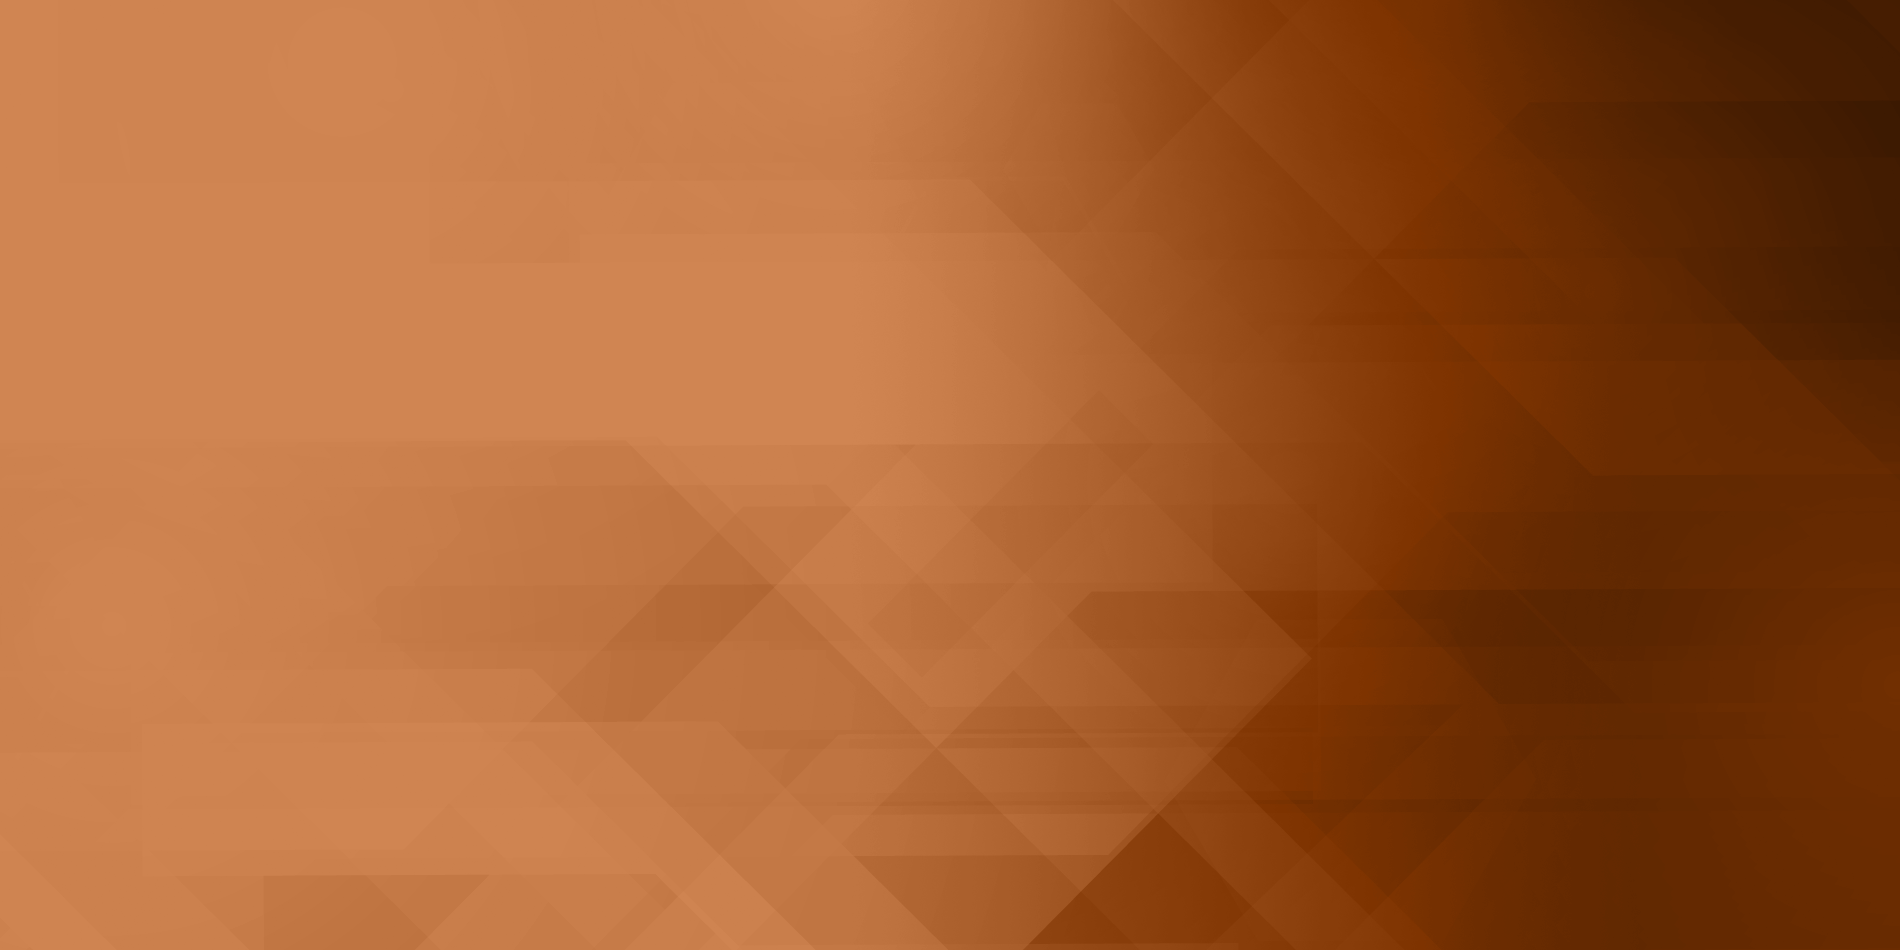 Orange abstract background banner image.